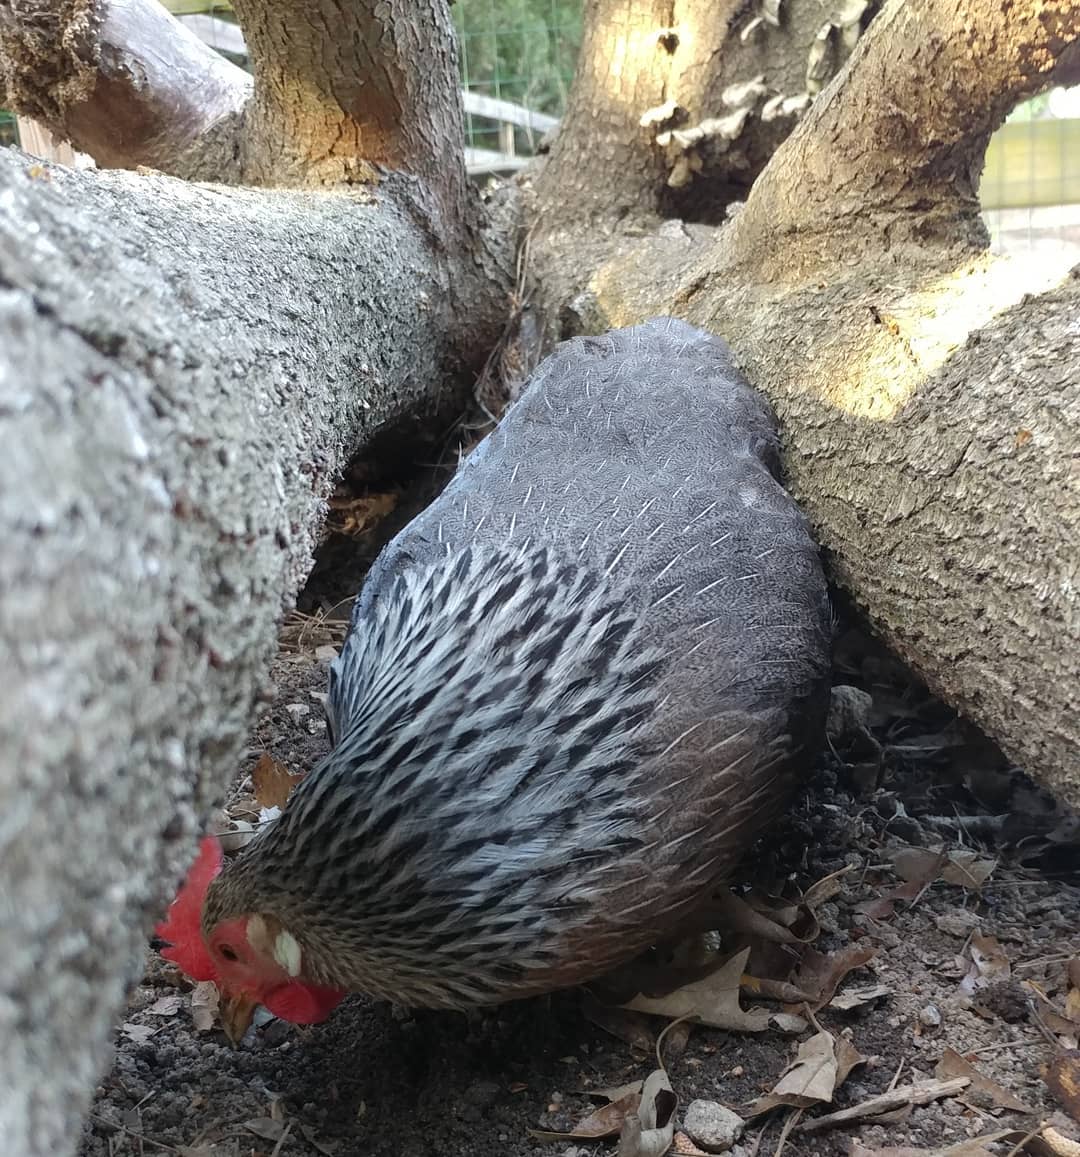 What are you doing chicken? How did you get in there? I heard digging but saw no chicken. I went to investigate and found this weirdo tunneling under a log. I have a mole-chicken!